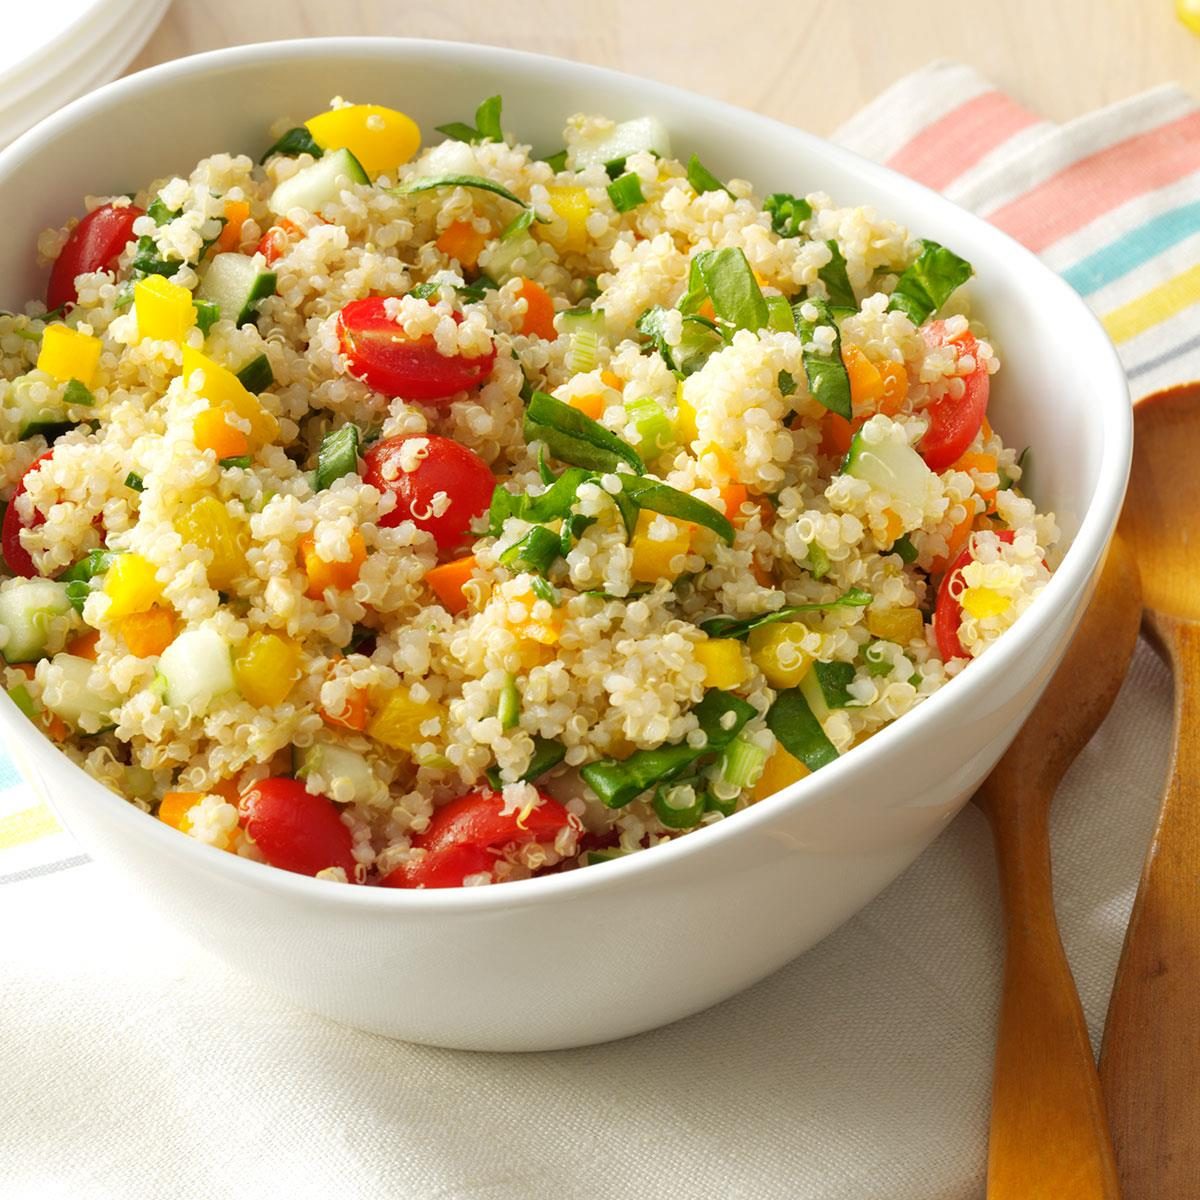 Colorful Quinoa Salad Recipe: How to Make It | Taste of Home